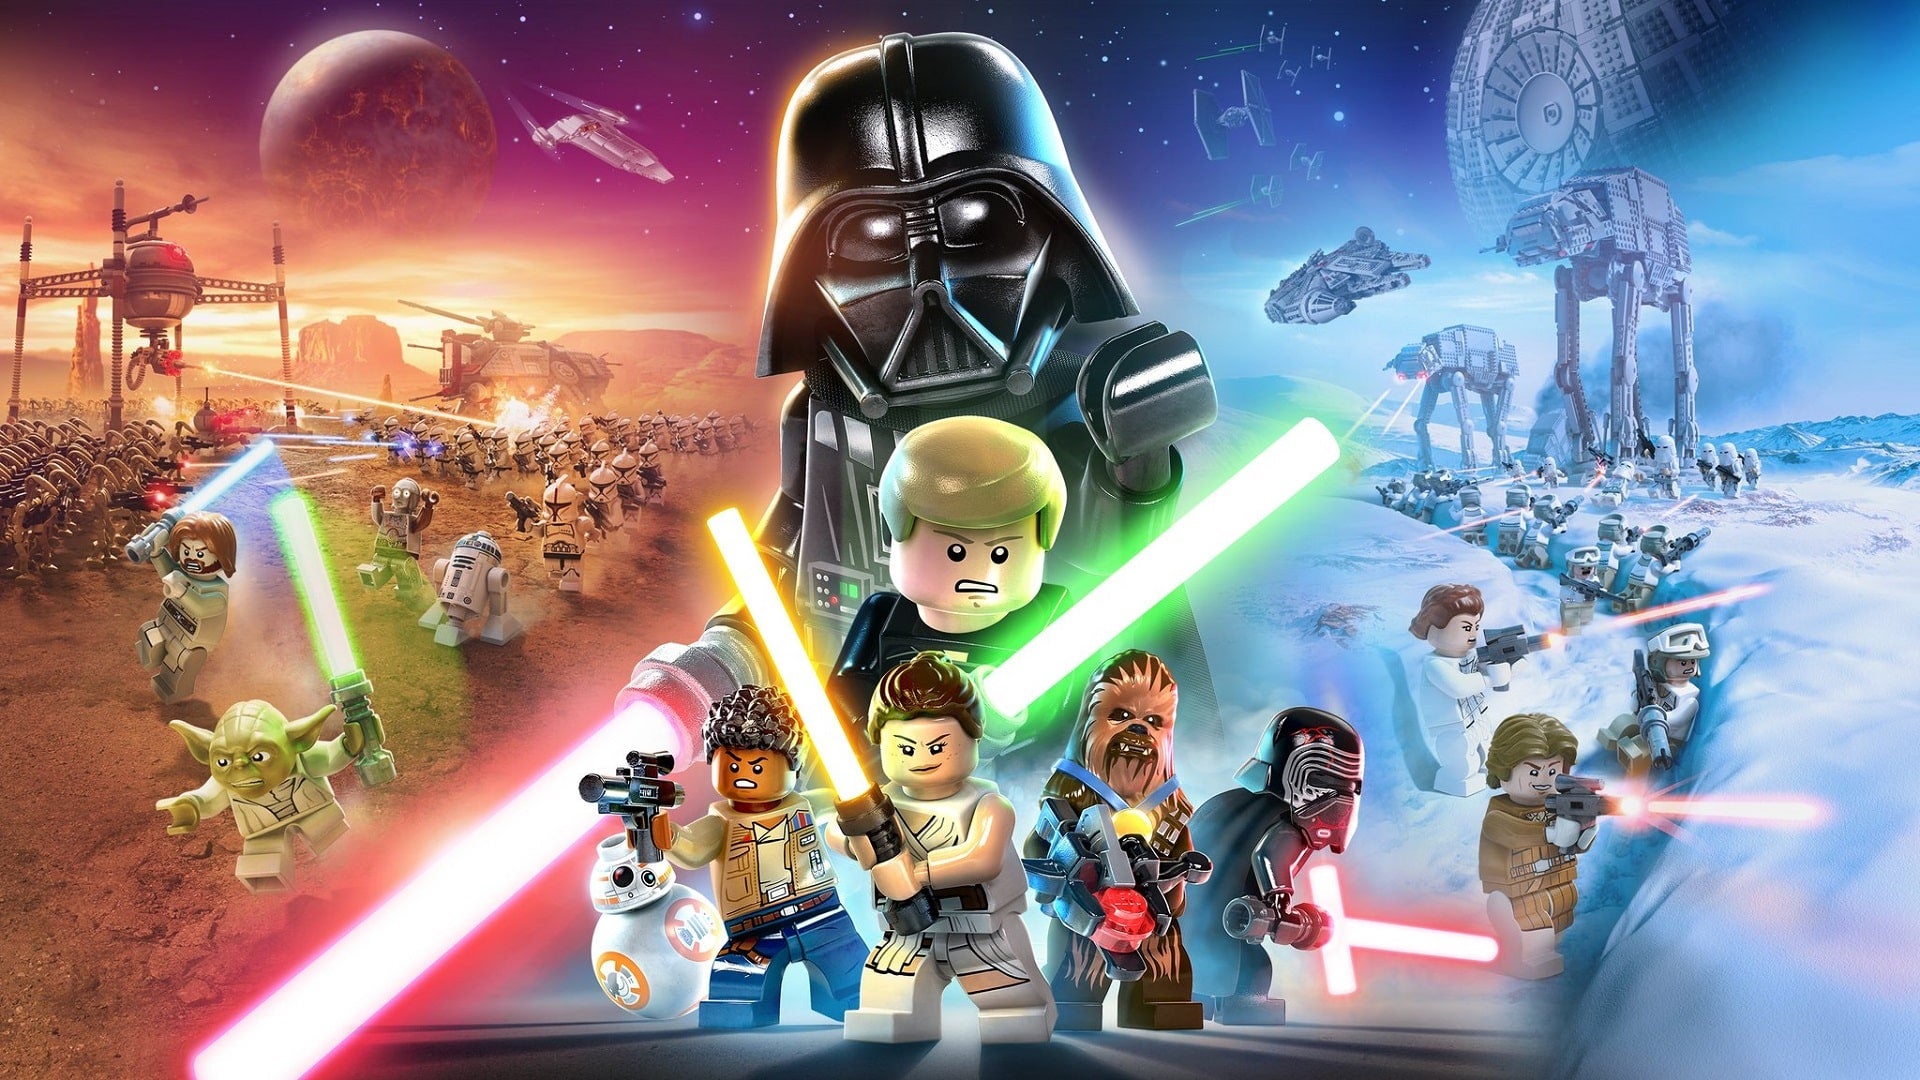 Image for Lego Star Wars: The Skywalker Saga is UK's second-biggest boxed launch this year